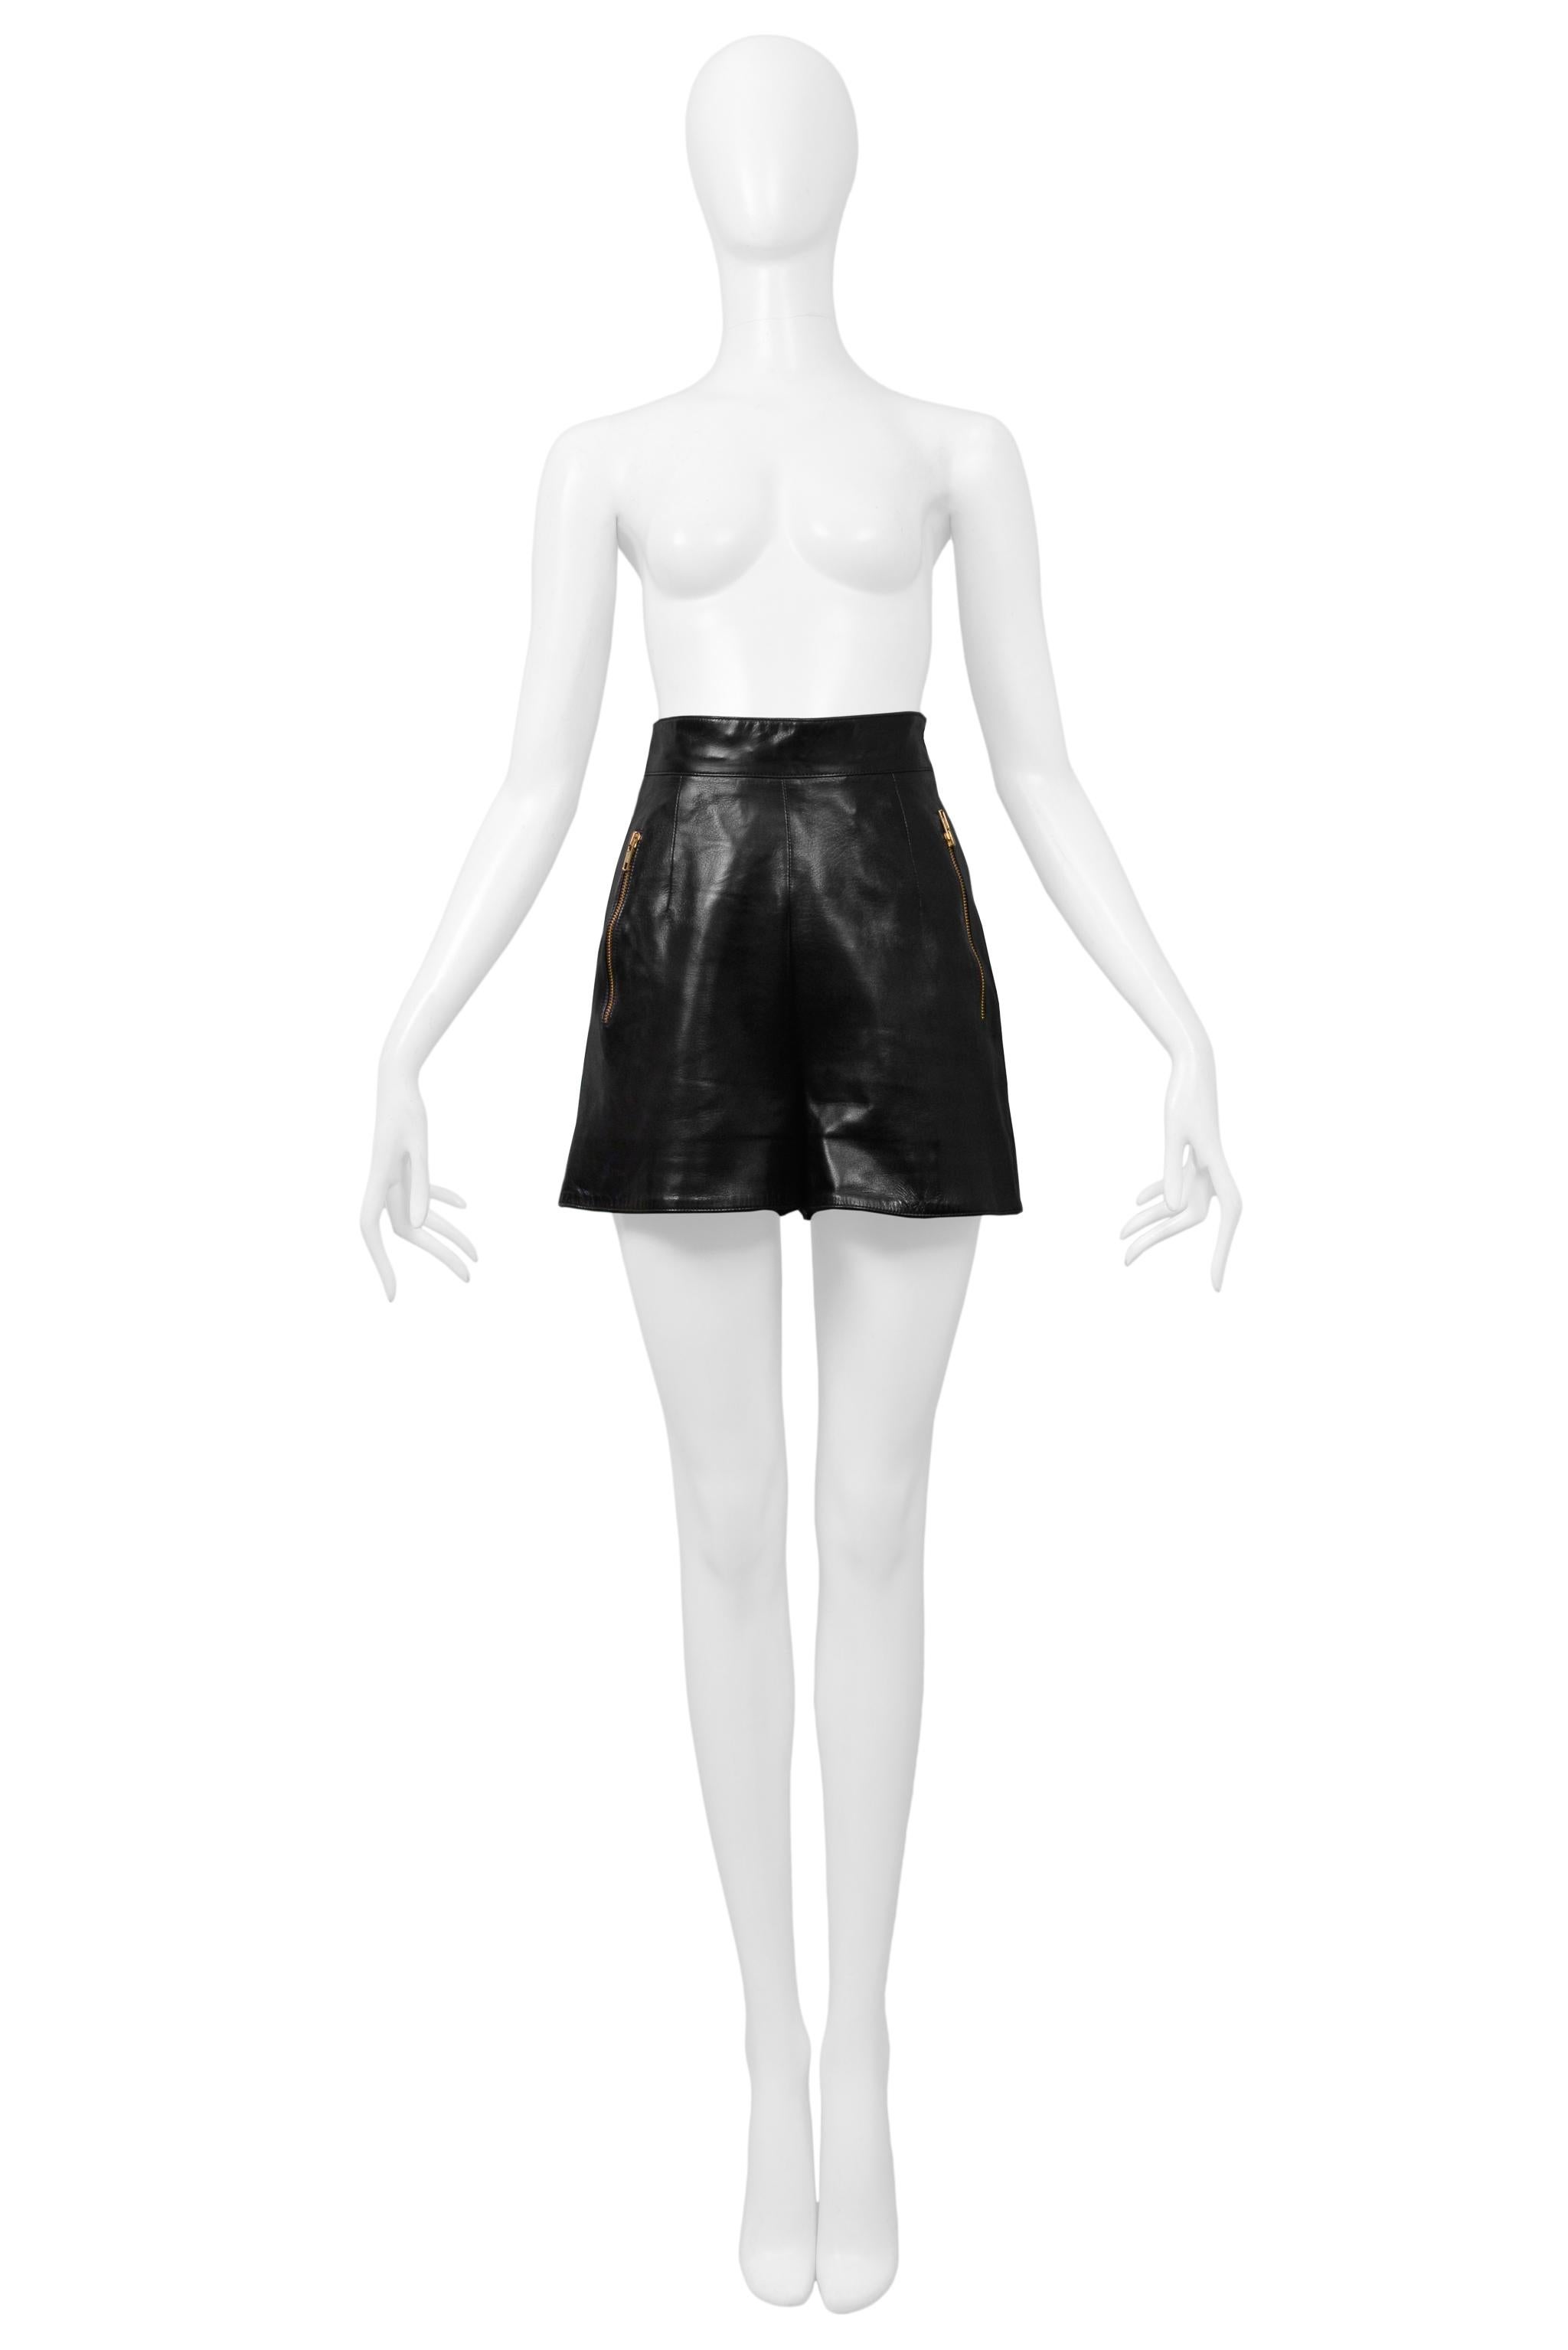 Resurrection Vintage is excited to offer a pair of vintage Claude Montana black leather high-waisted shorts featuring gold-tone front zippers, a high waist, and a lined interior.

Claude Montana 
Size 38
Leather
Excellent Vintage